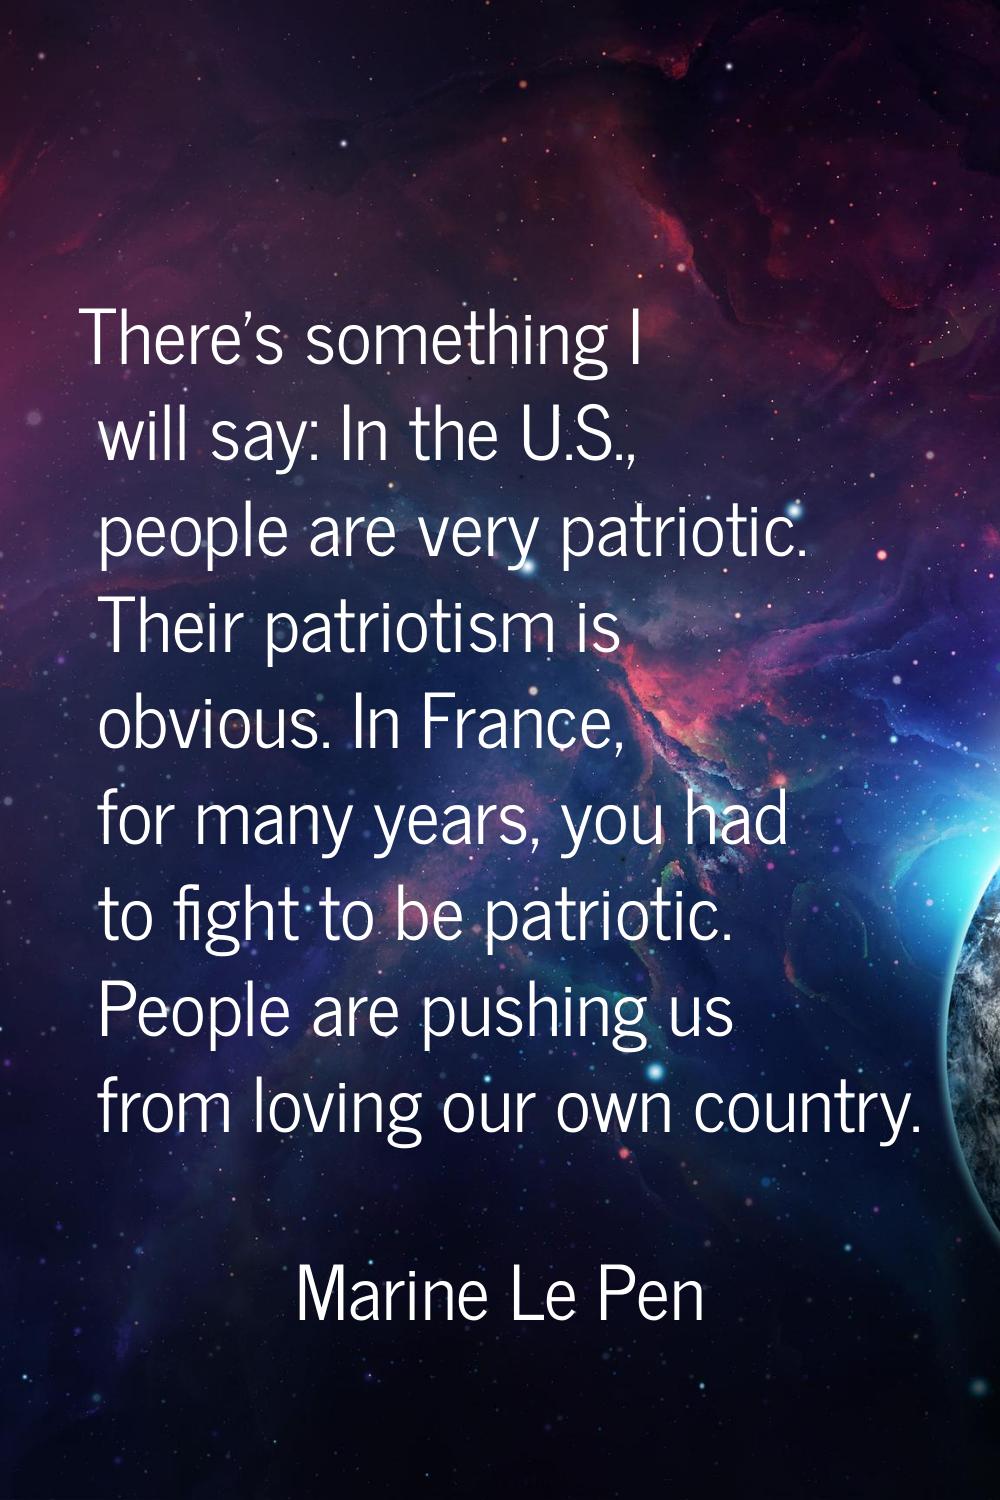 There's something I will say: In the U.S., people are very patriotic. Their patriotism is obvious. 